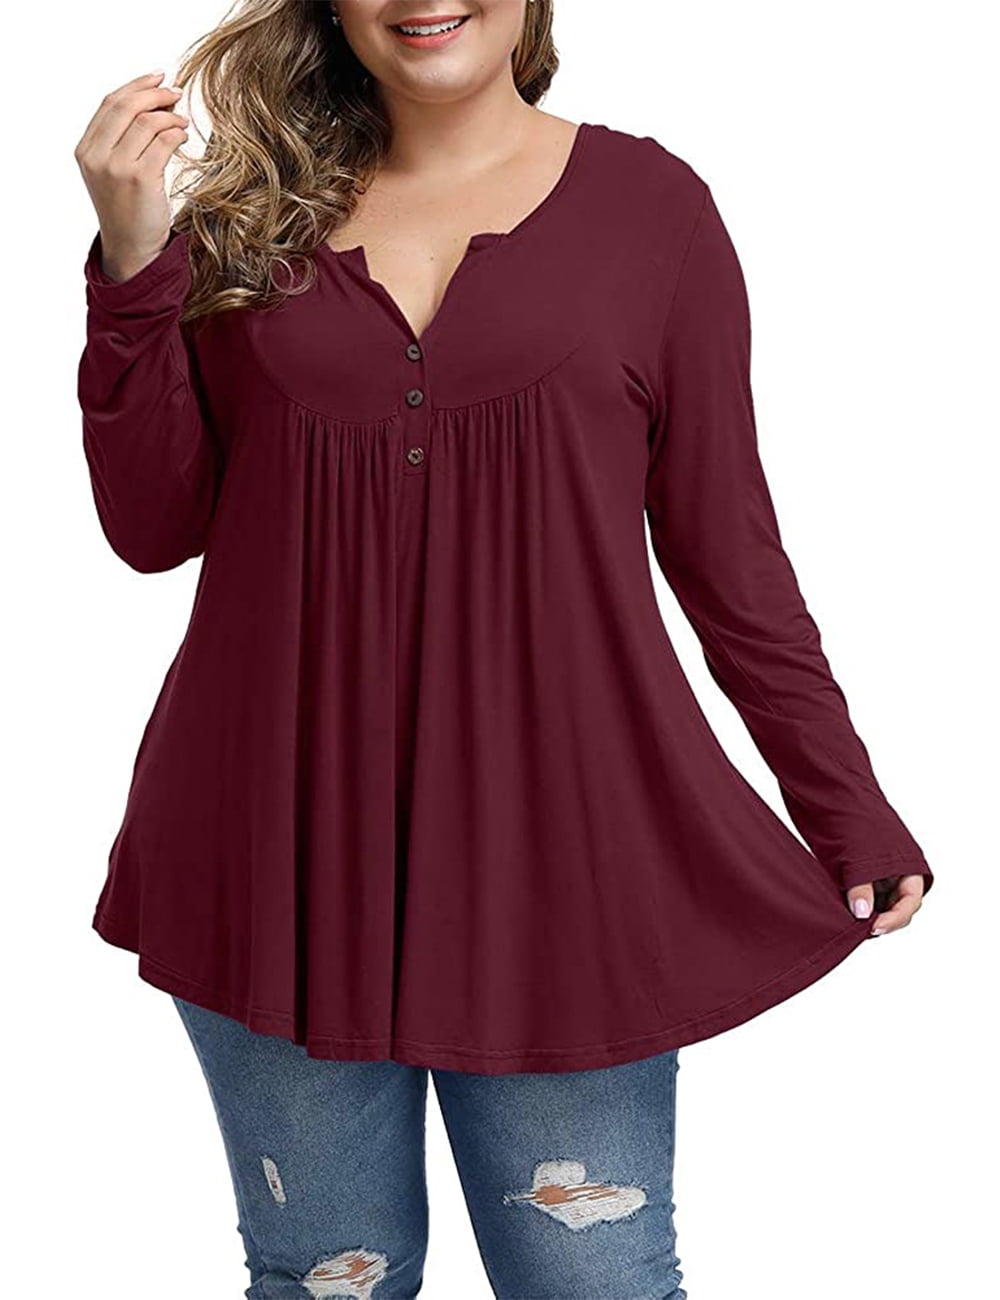 Wine Red,3X DIOLOCA Womens Tops Plus Size Henley Shirts V Neck Button Up Blouses Ruffle Pleated Tunics Short Sleeve Tops